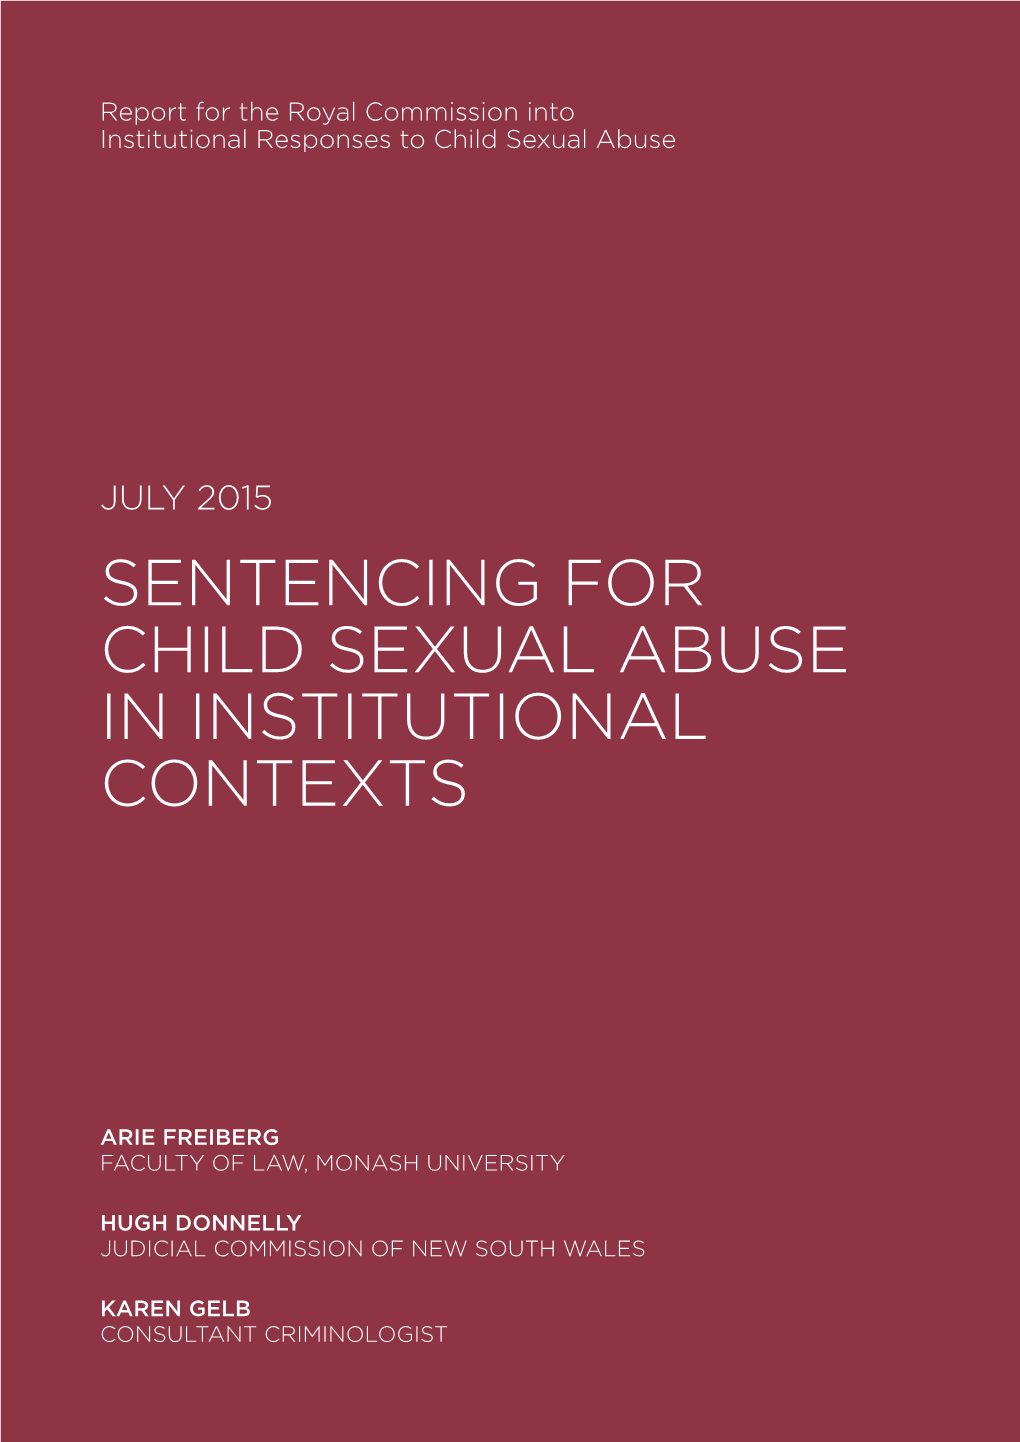 July 2015 Sentencing for Child Sexual Abuse in Institutional Contexts